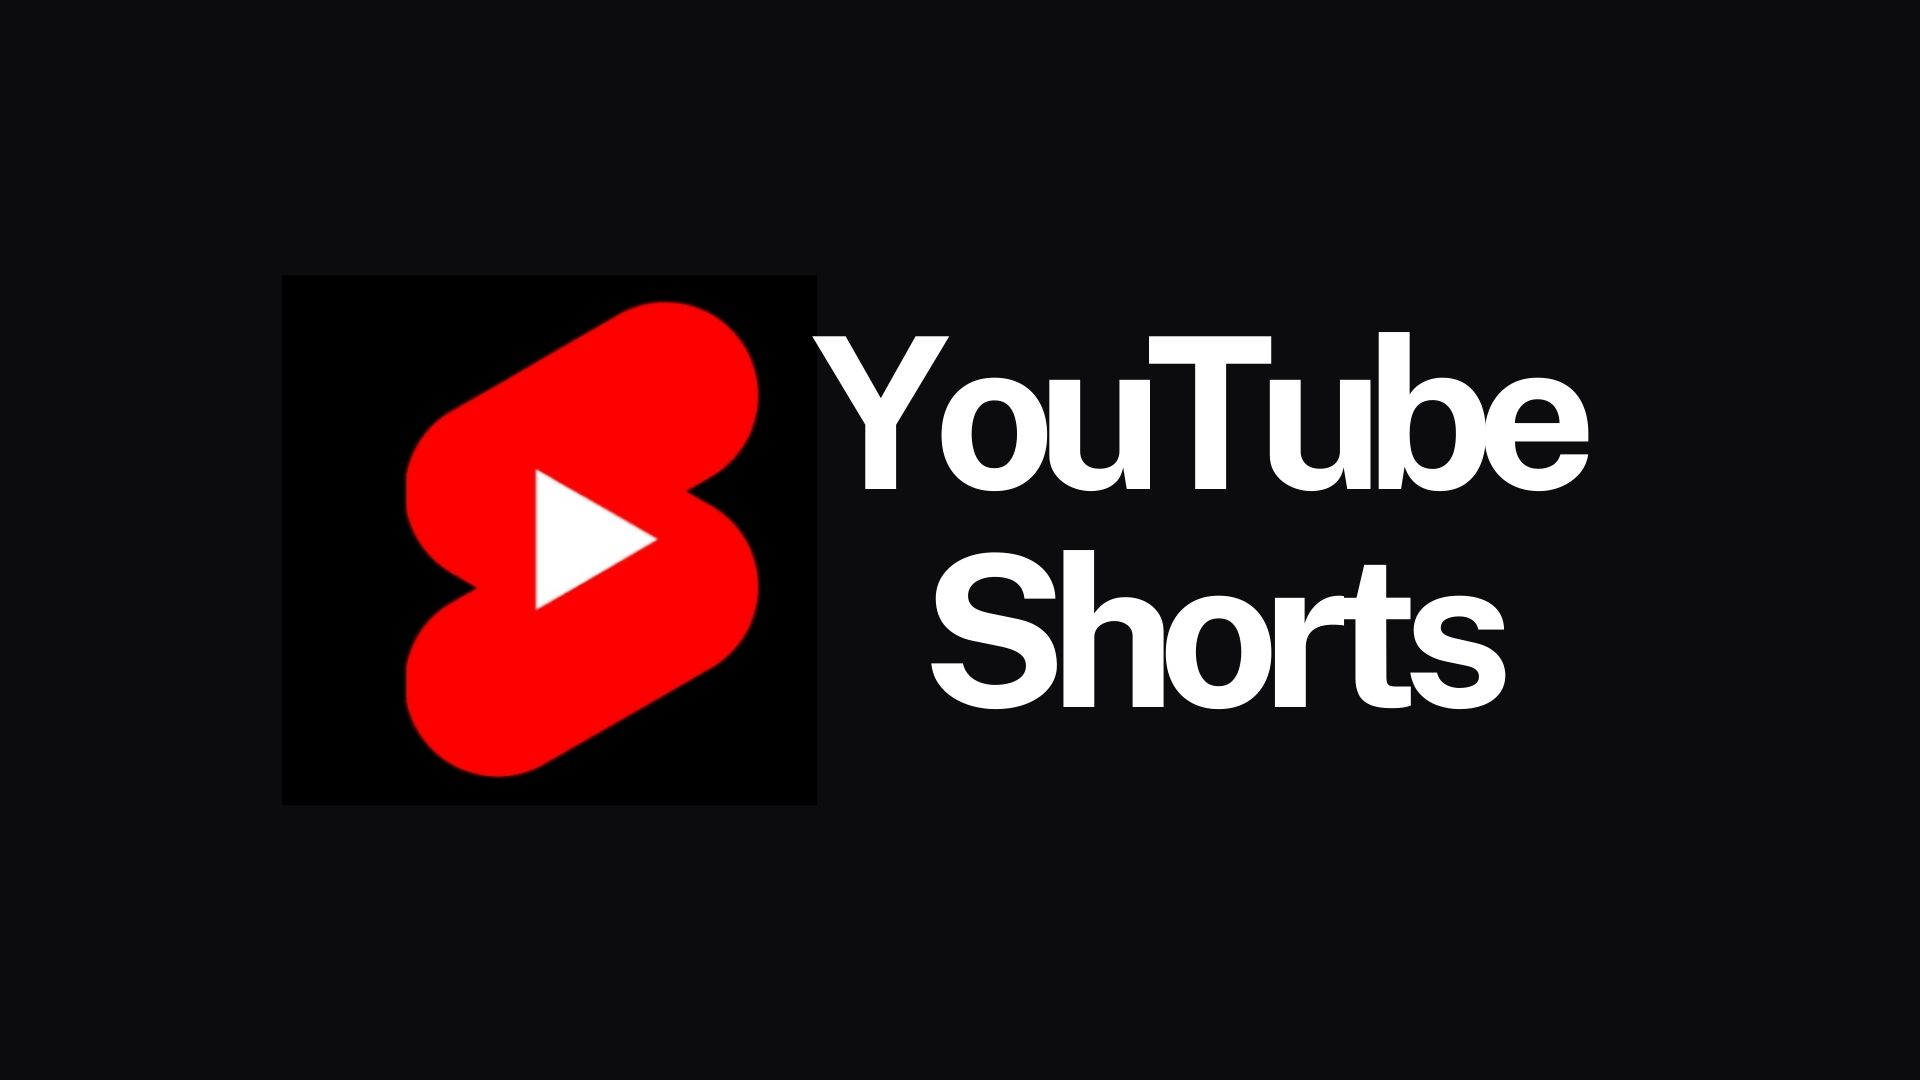 [FULL] Youtube Shorts Bad Quality ~ Here's the explanation